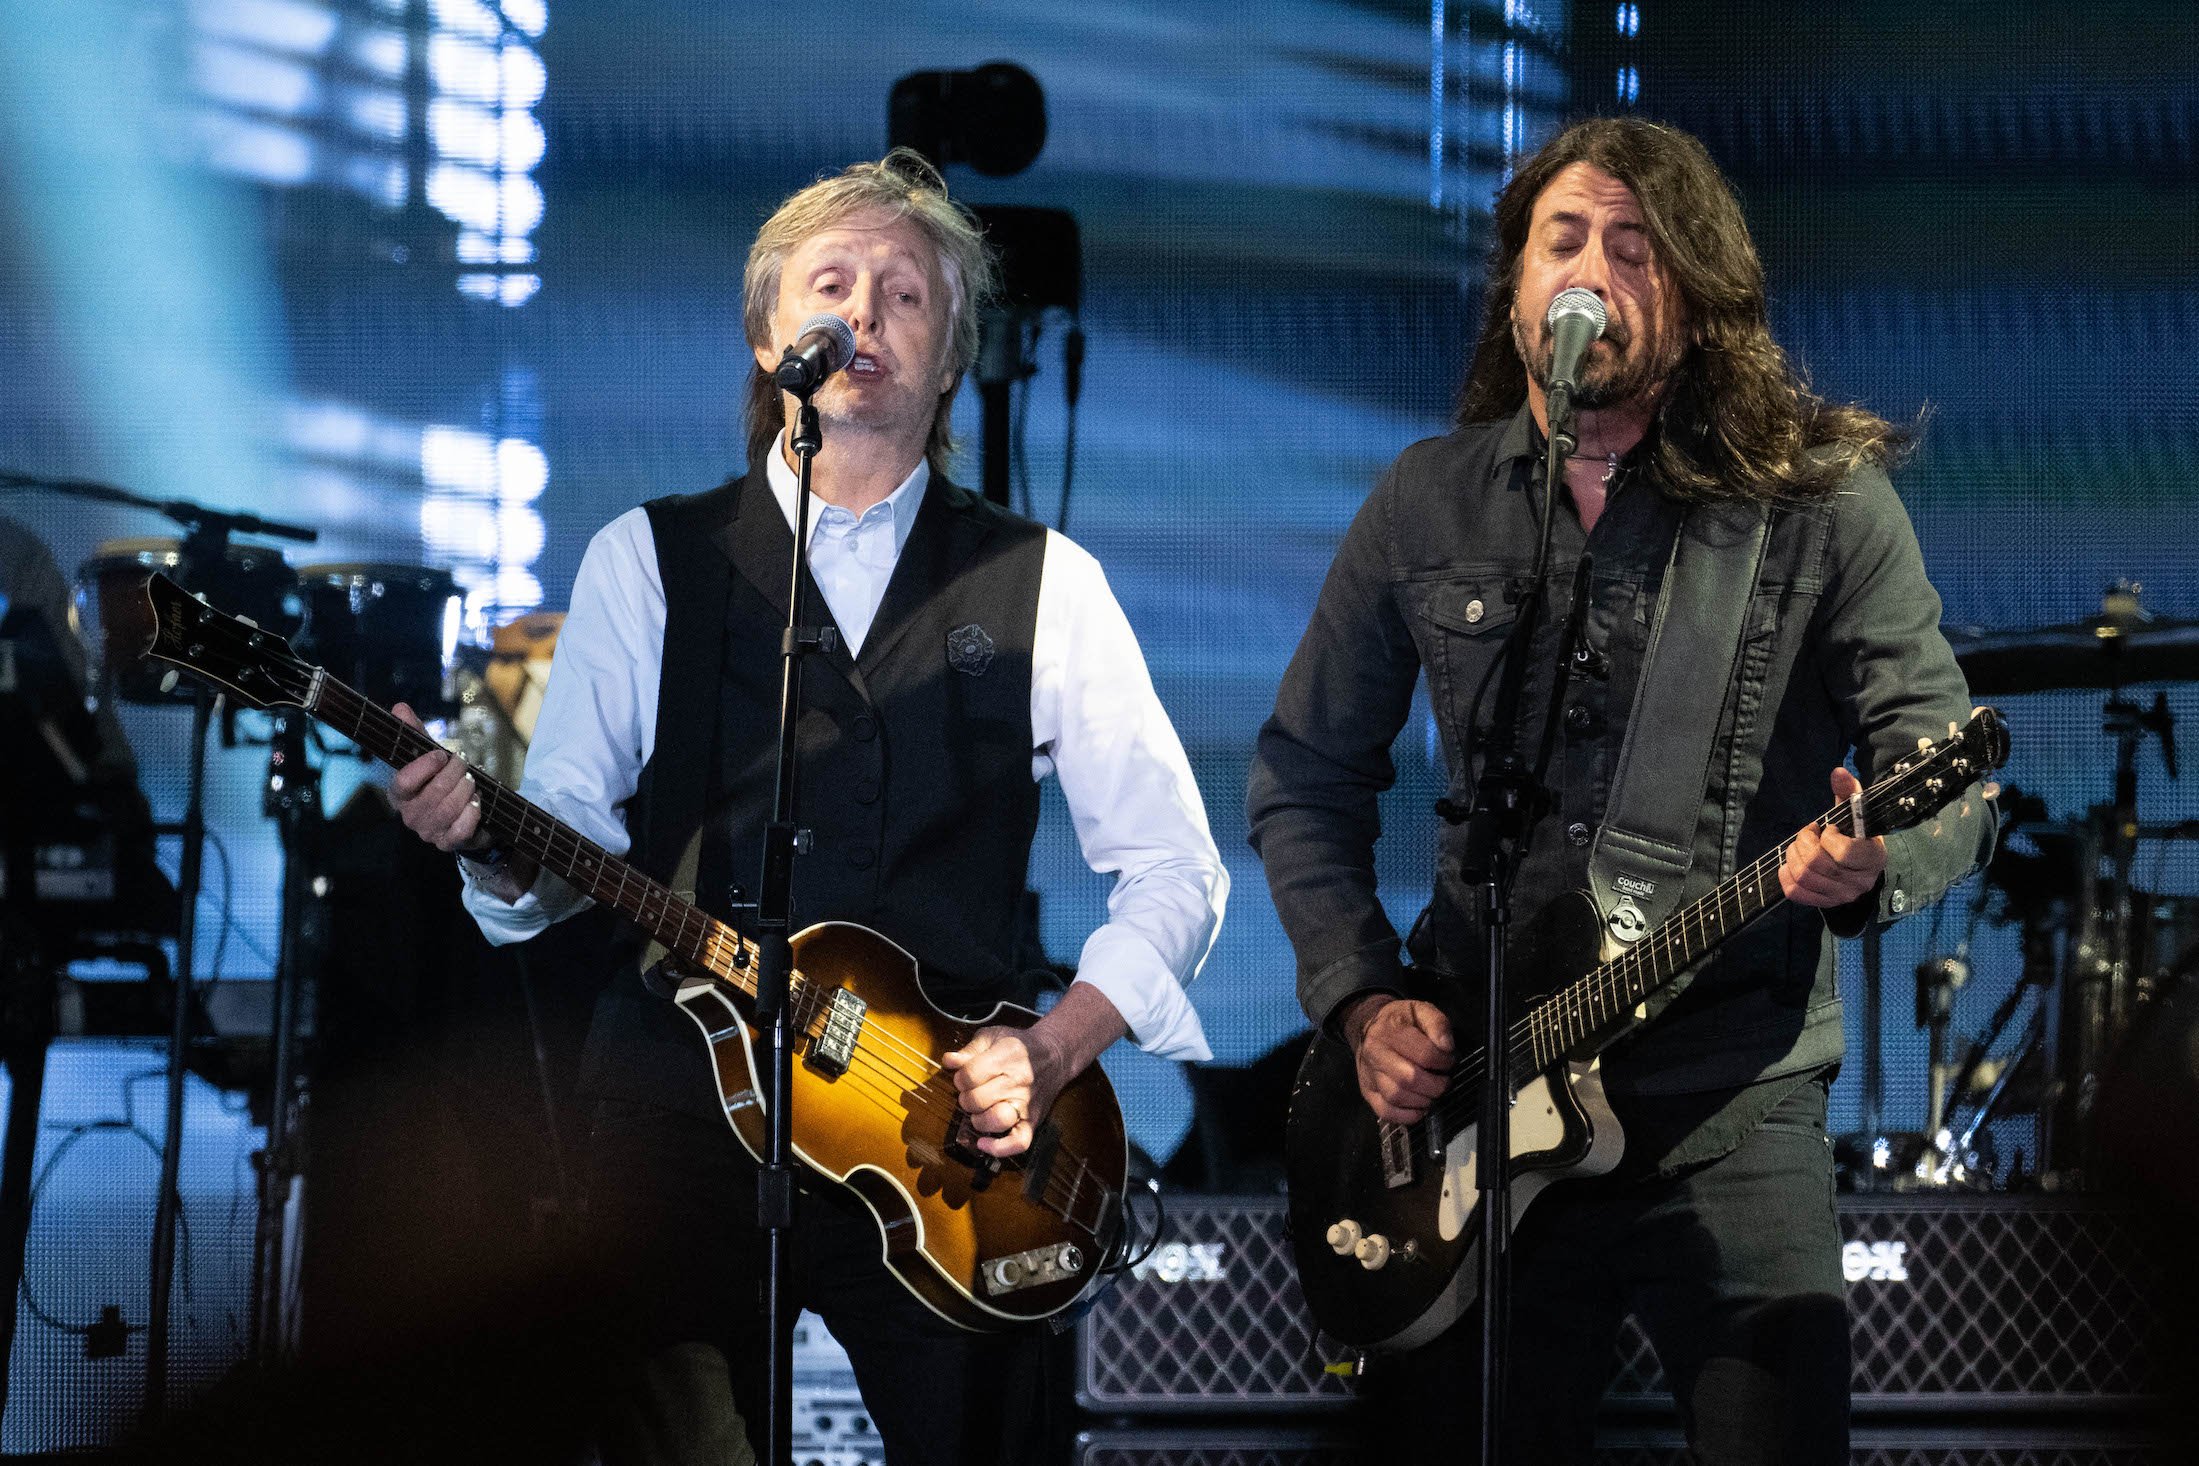 Paul McCartney and Dave Grohl perform Band on the Run at Glastonbury Festival 2022